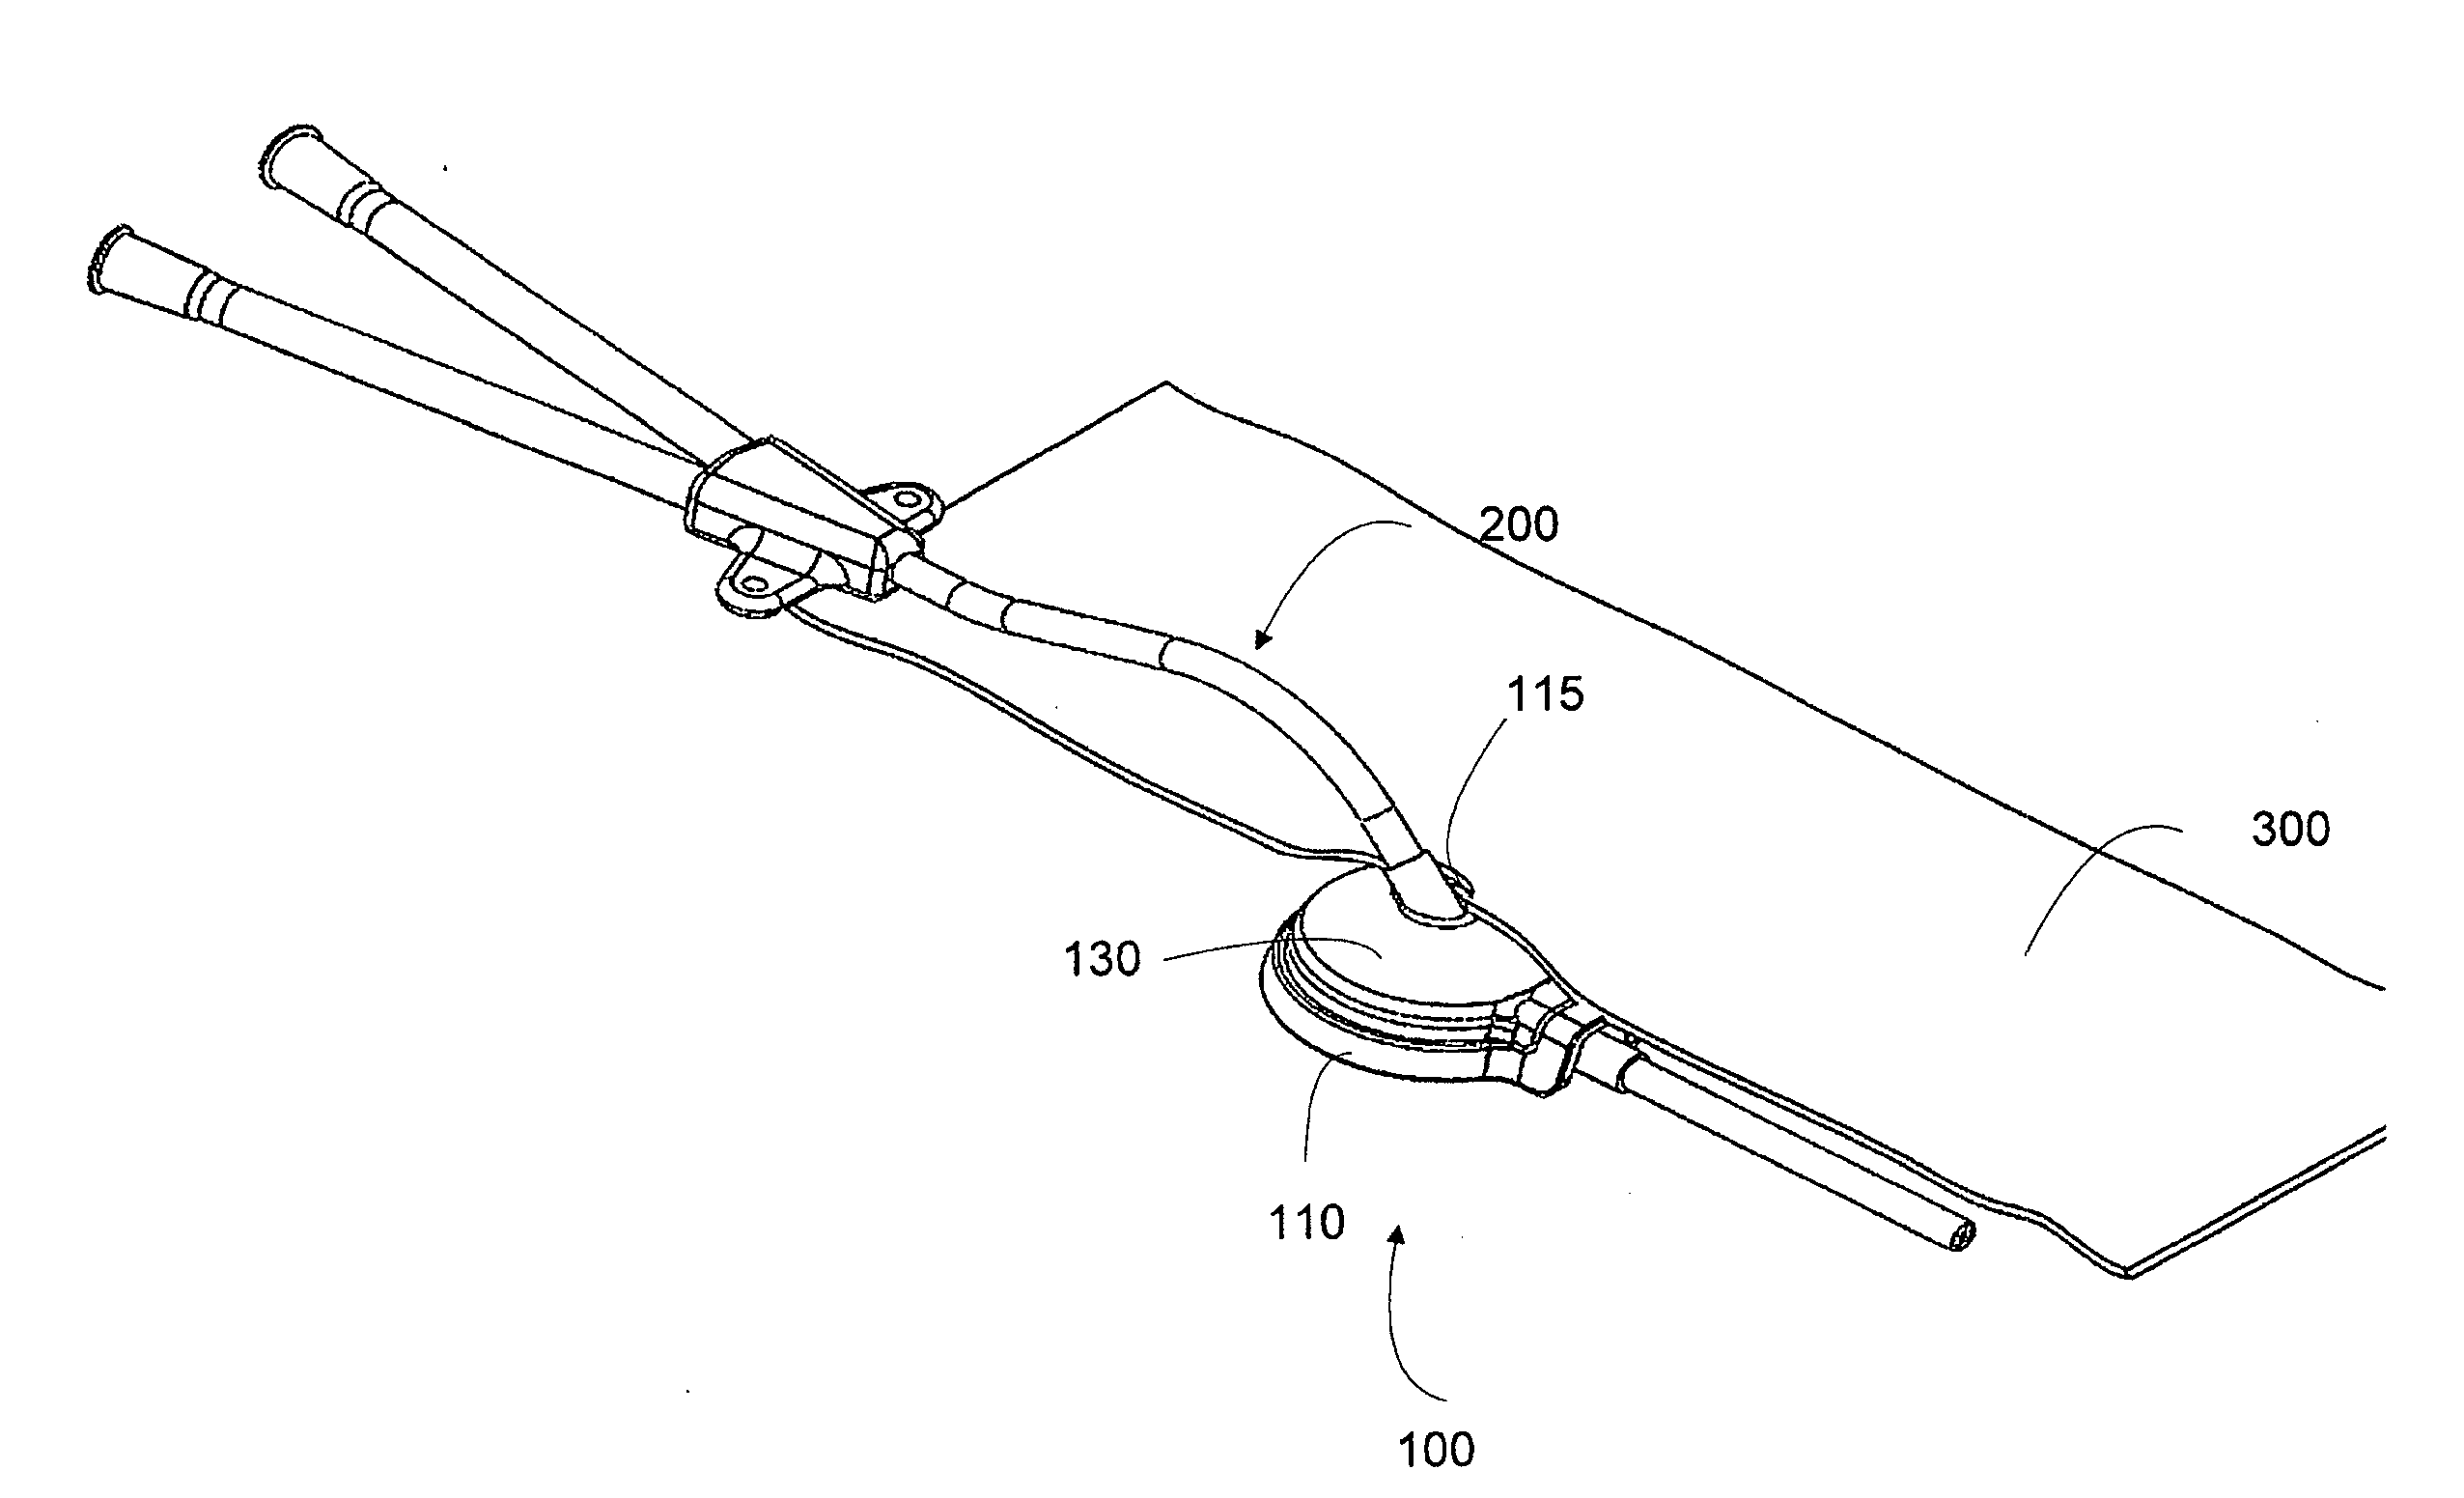 Deformable medical implant